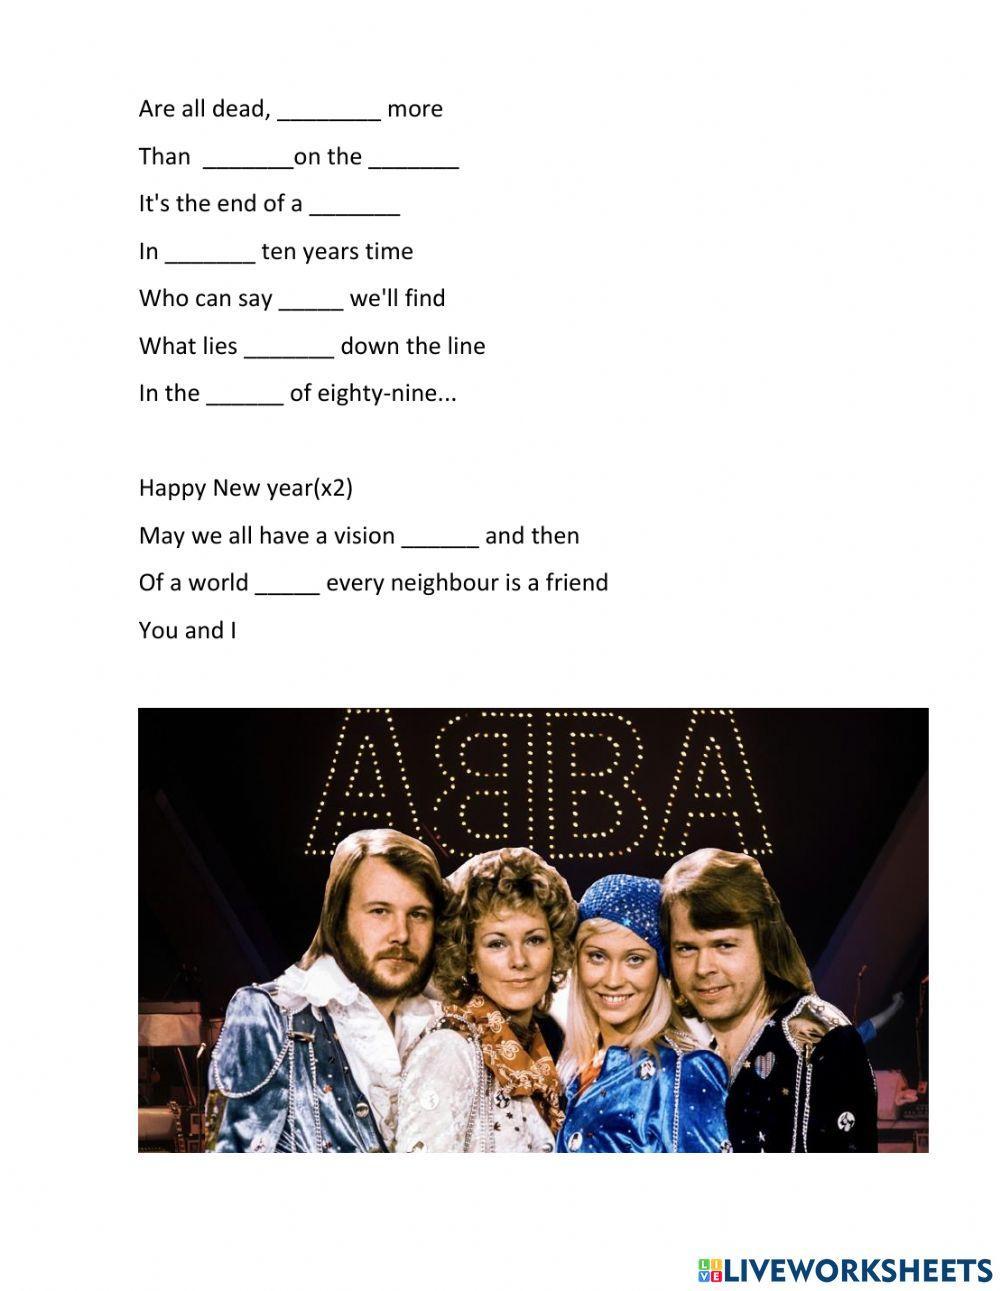 Happy New Year by Abba worksheet | Live Worksheets